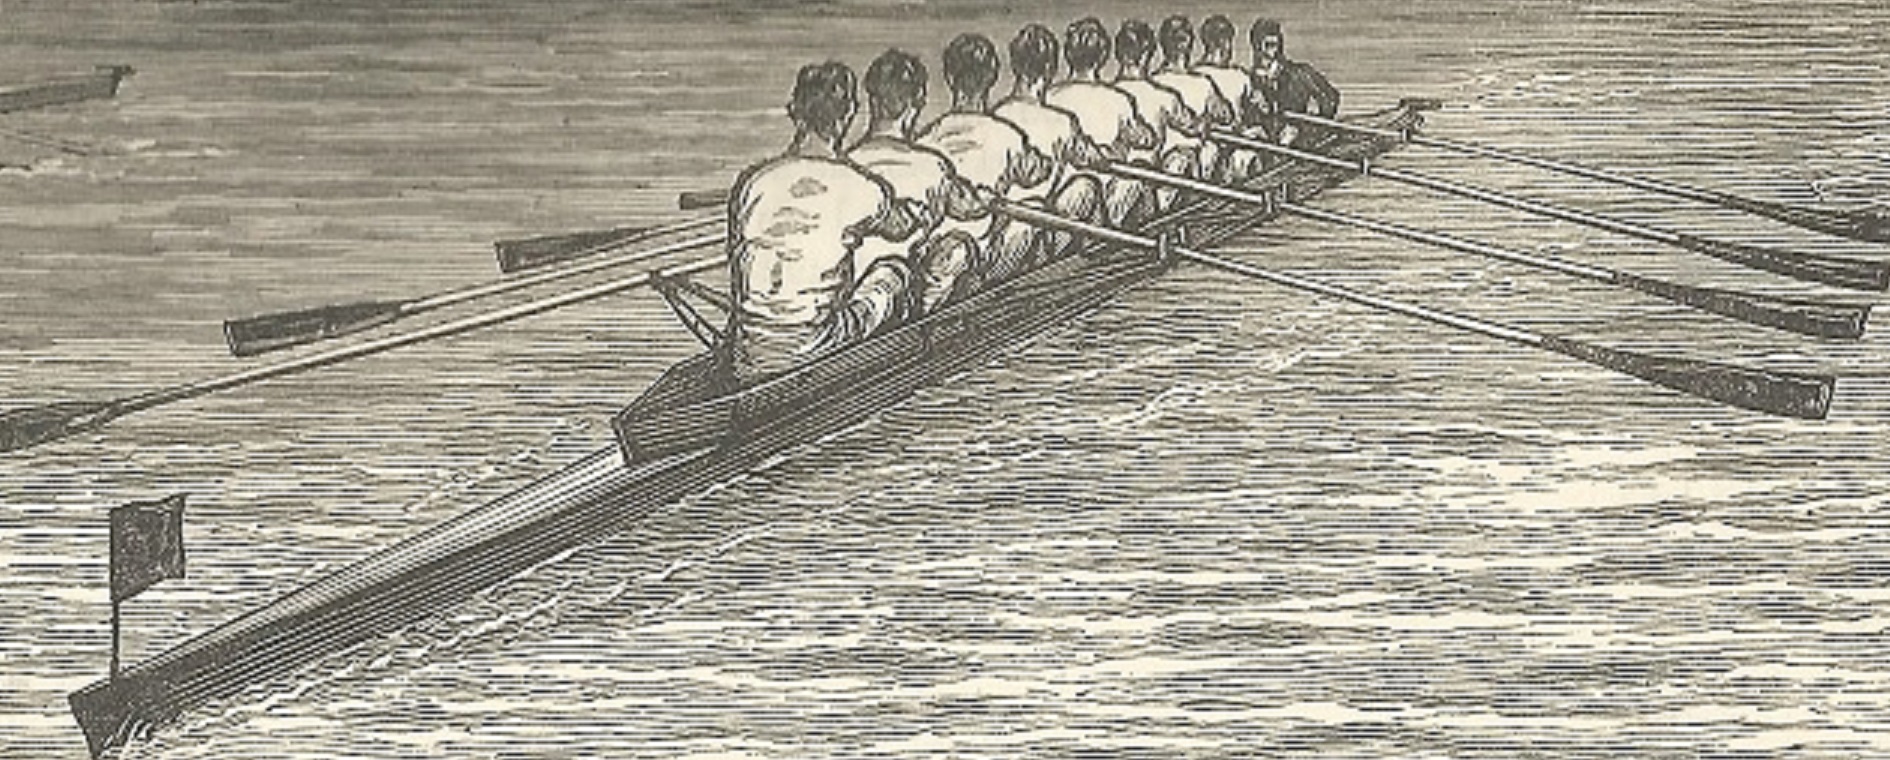 Print GBR 1882 Boat Race Oxford begins to lead The Illustrated London News Oxford on Surrey shore